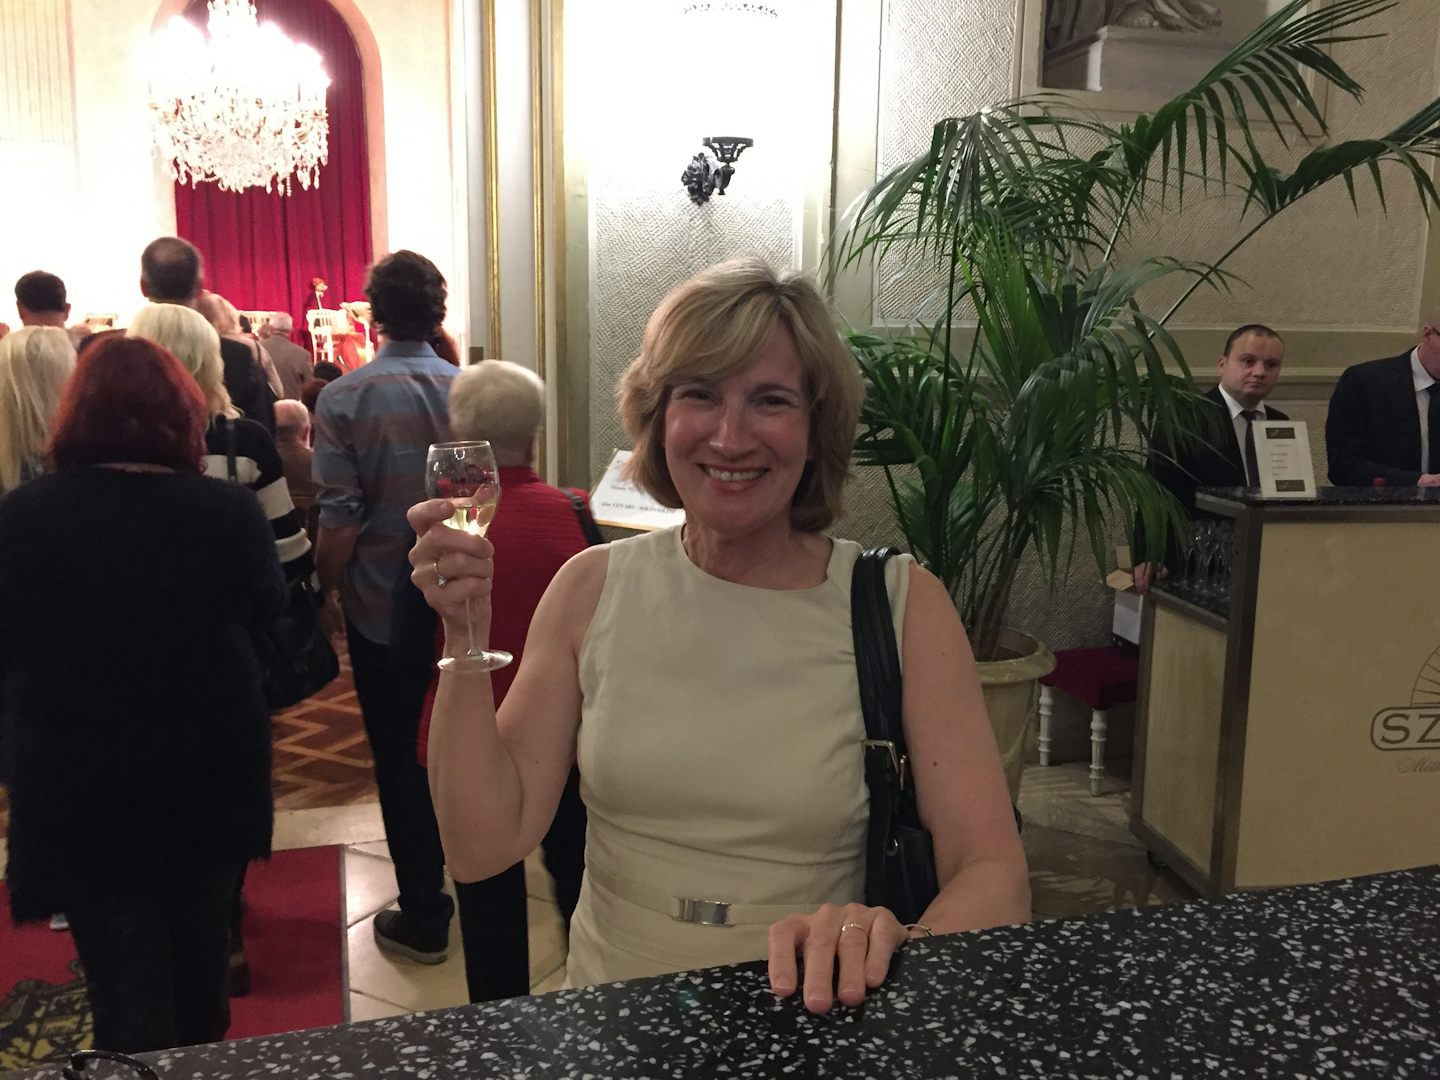 Sipping champagne at a concert in Vienna.